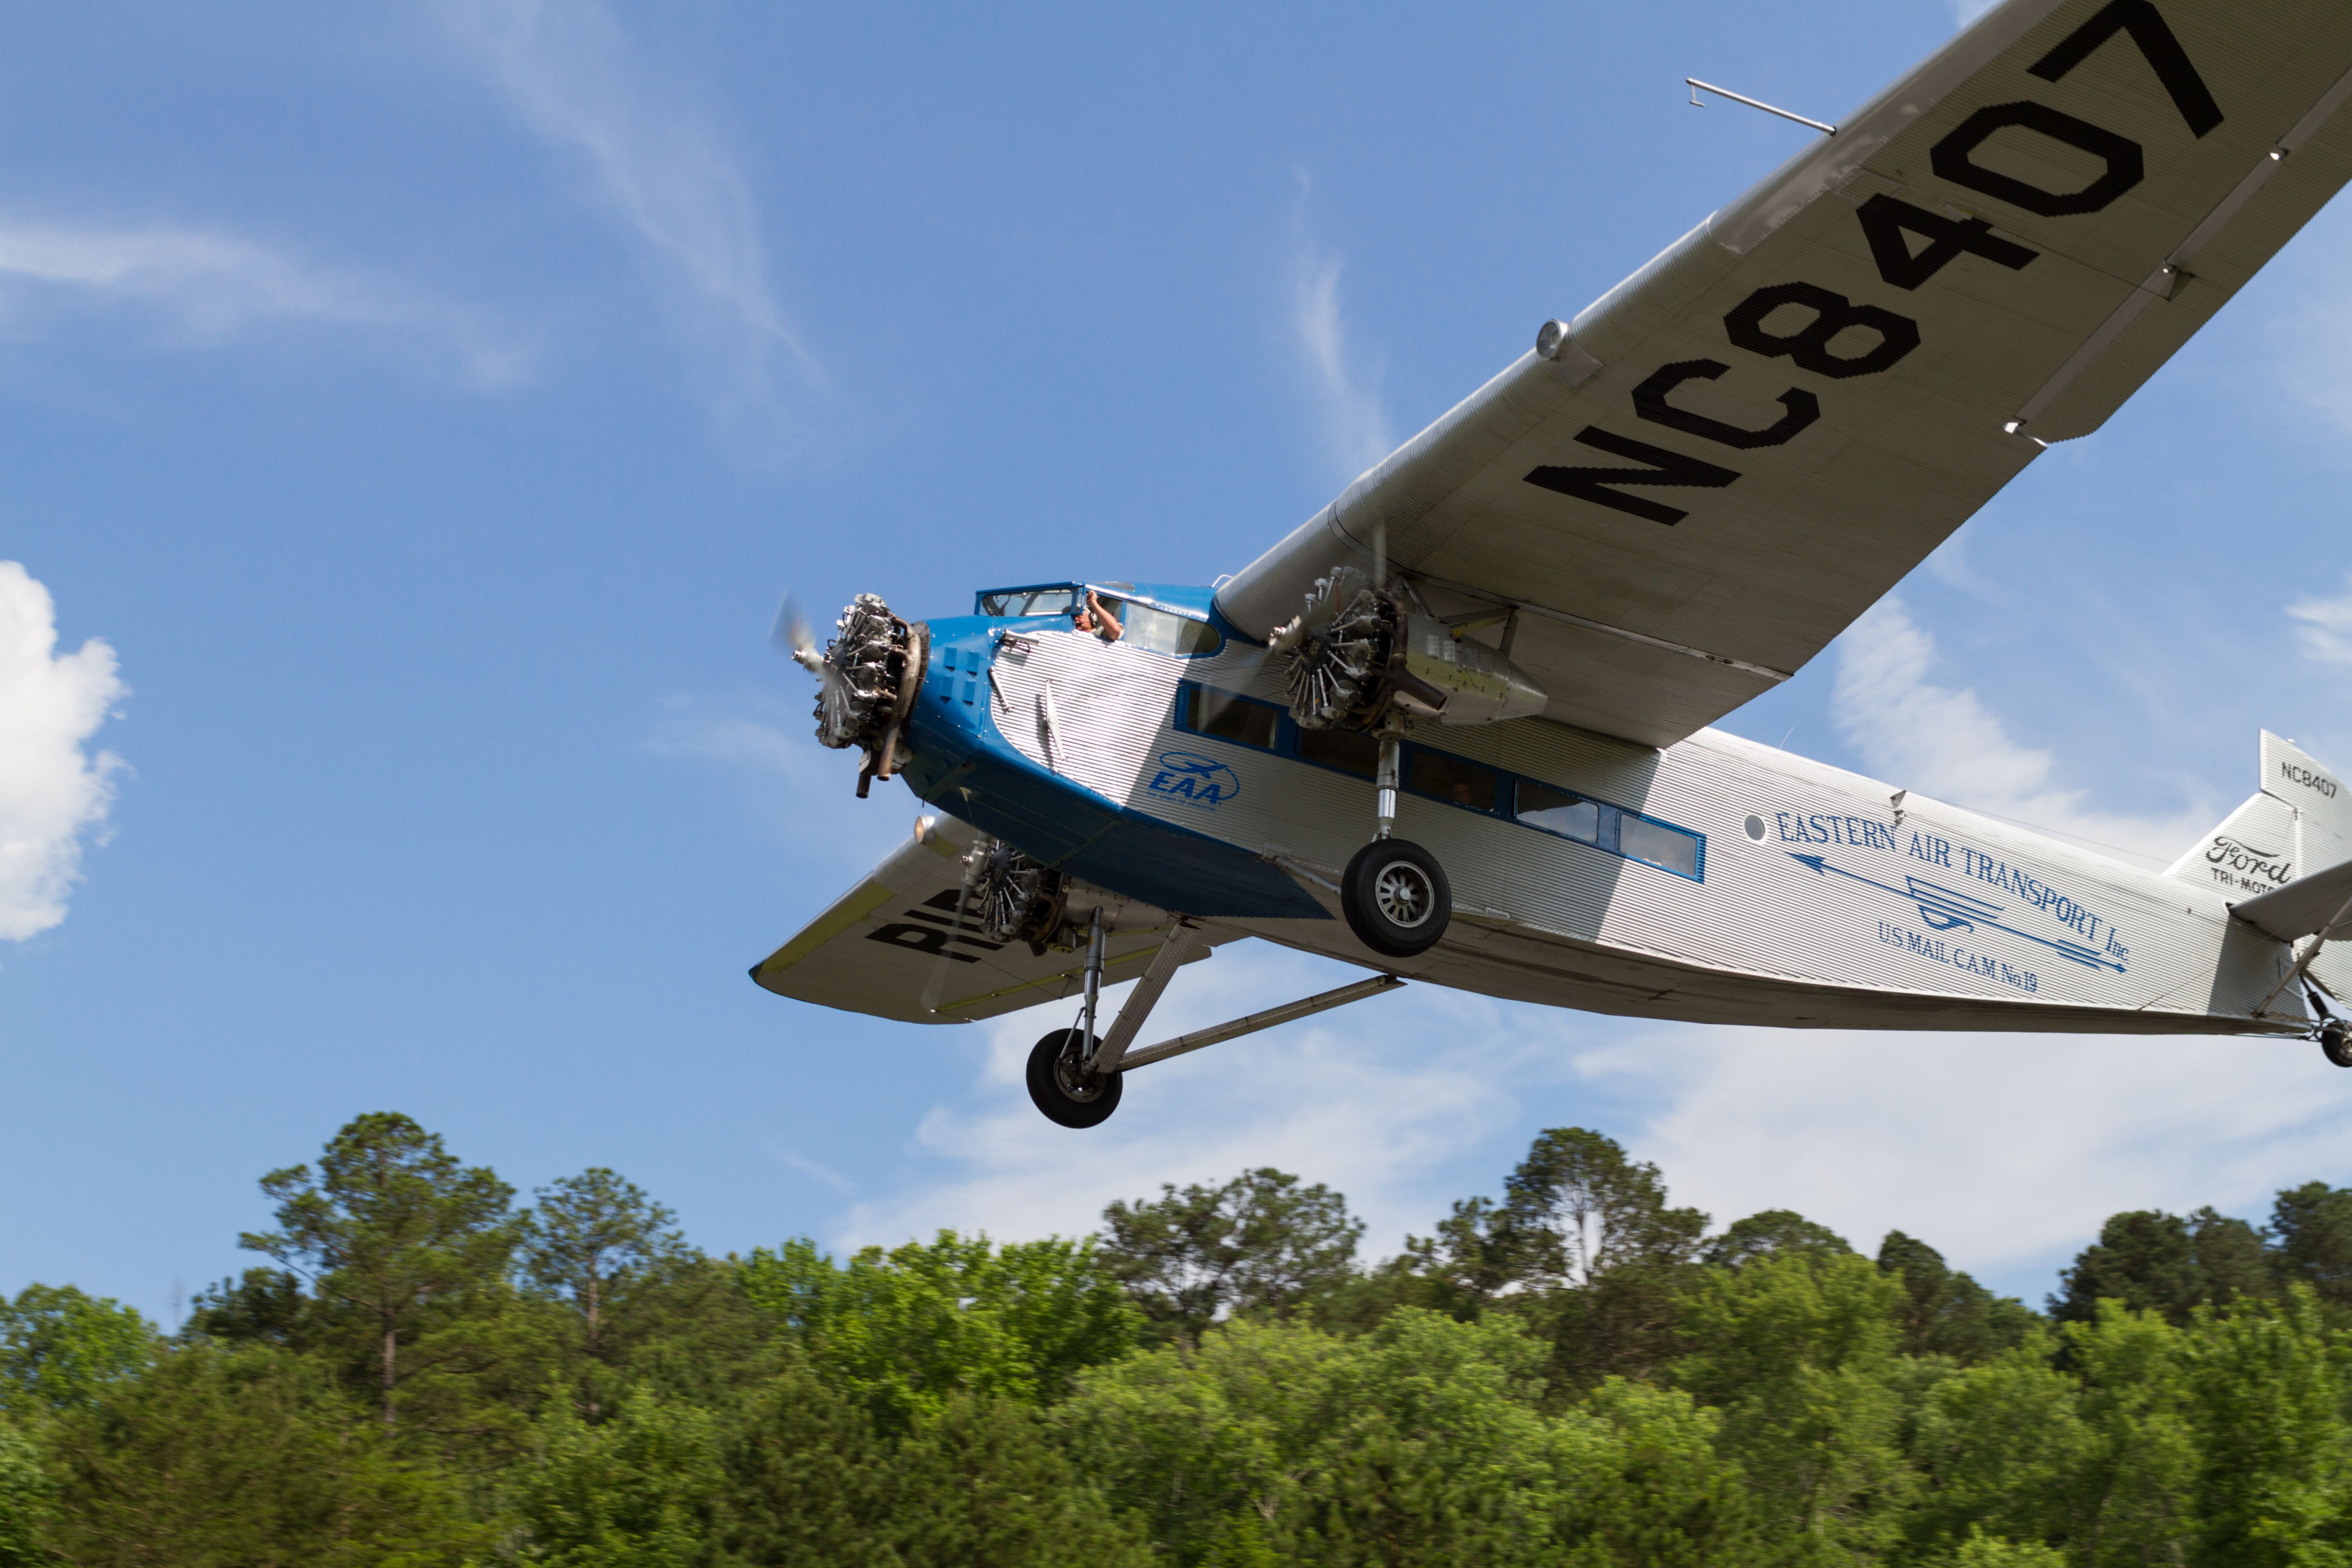 A 1929 Ford 4-AT-E Tri-motor airplane, operated by the Experimental Aircraft Association